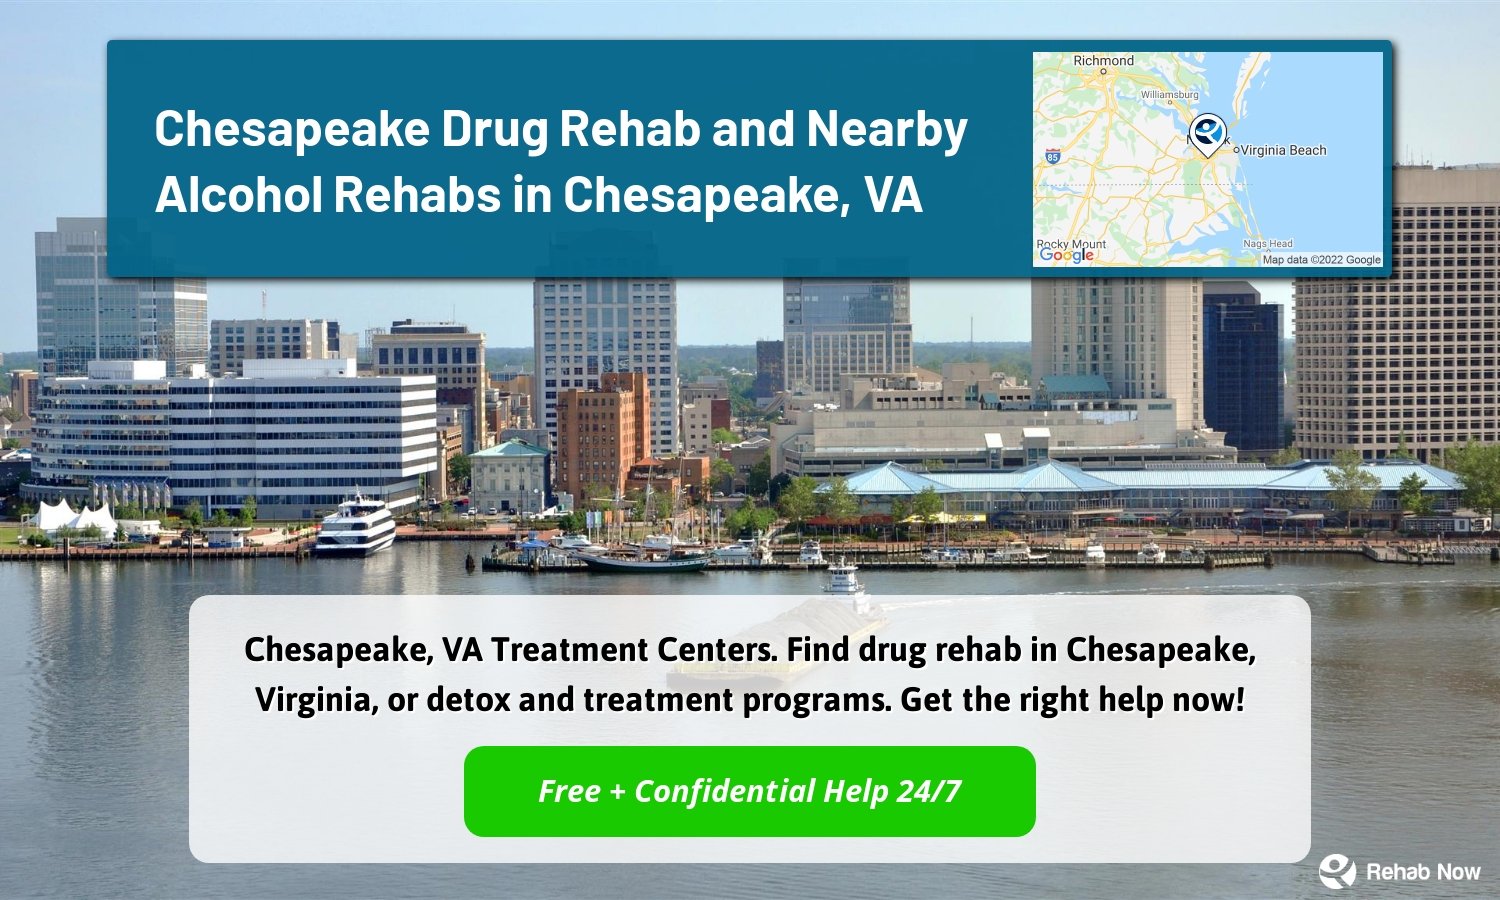 Chesapeake, VA Treatment Centers. Find drug rehab in Chesapeake, Virginia, or detox and treatment programs. Get the right help now!